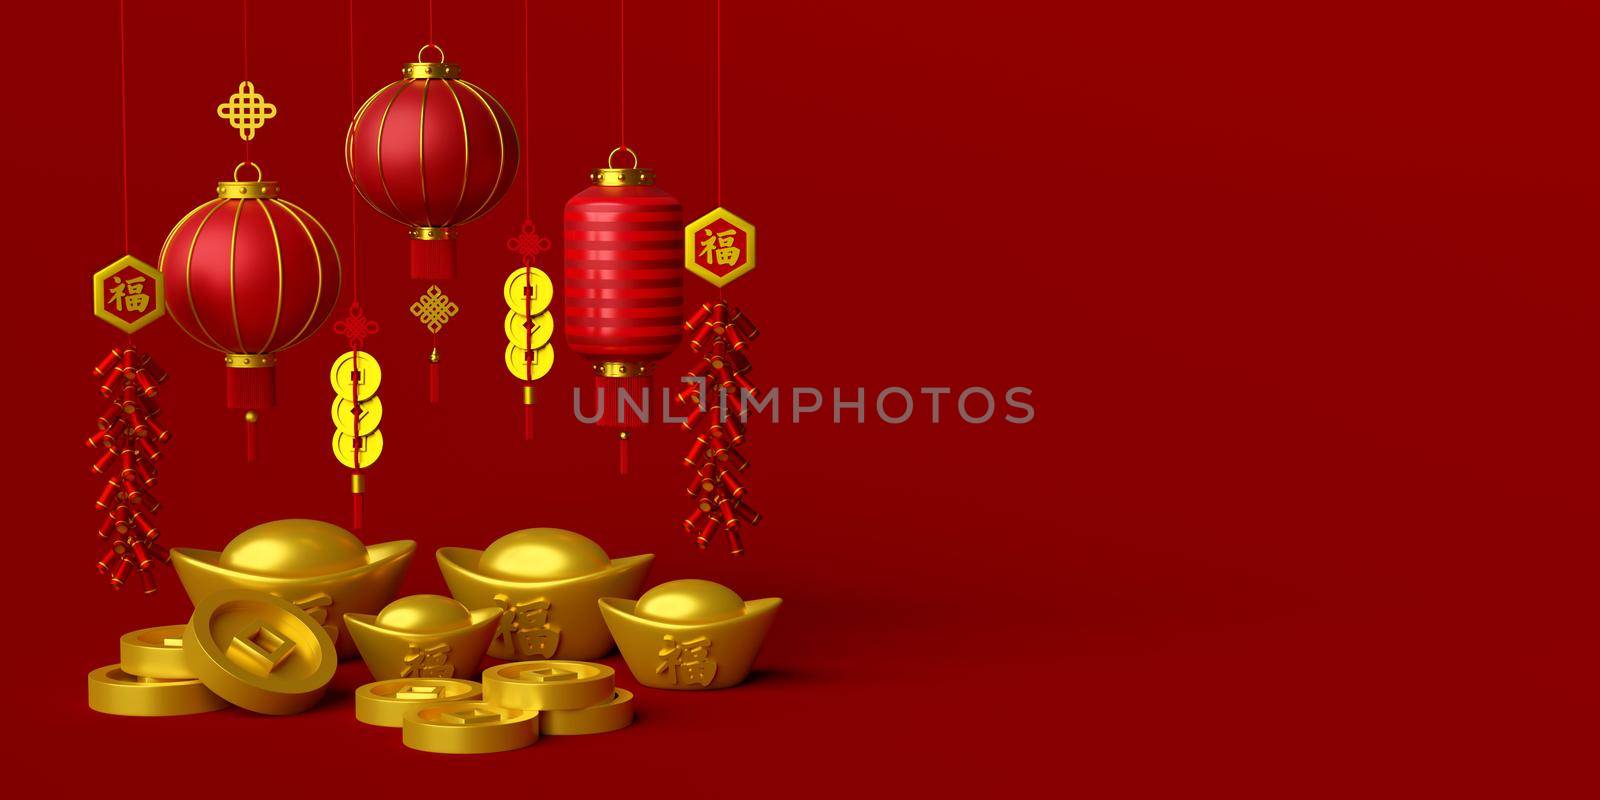 3d illustration of Chinese new year banner with Chinese lantern, ingot and coin